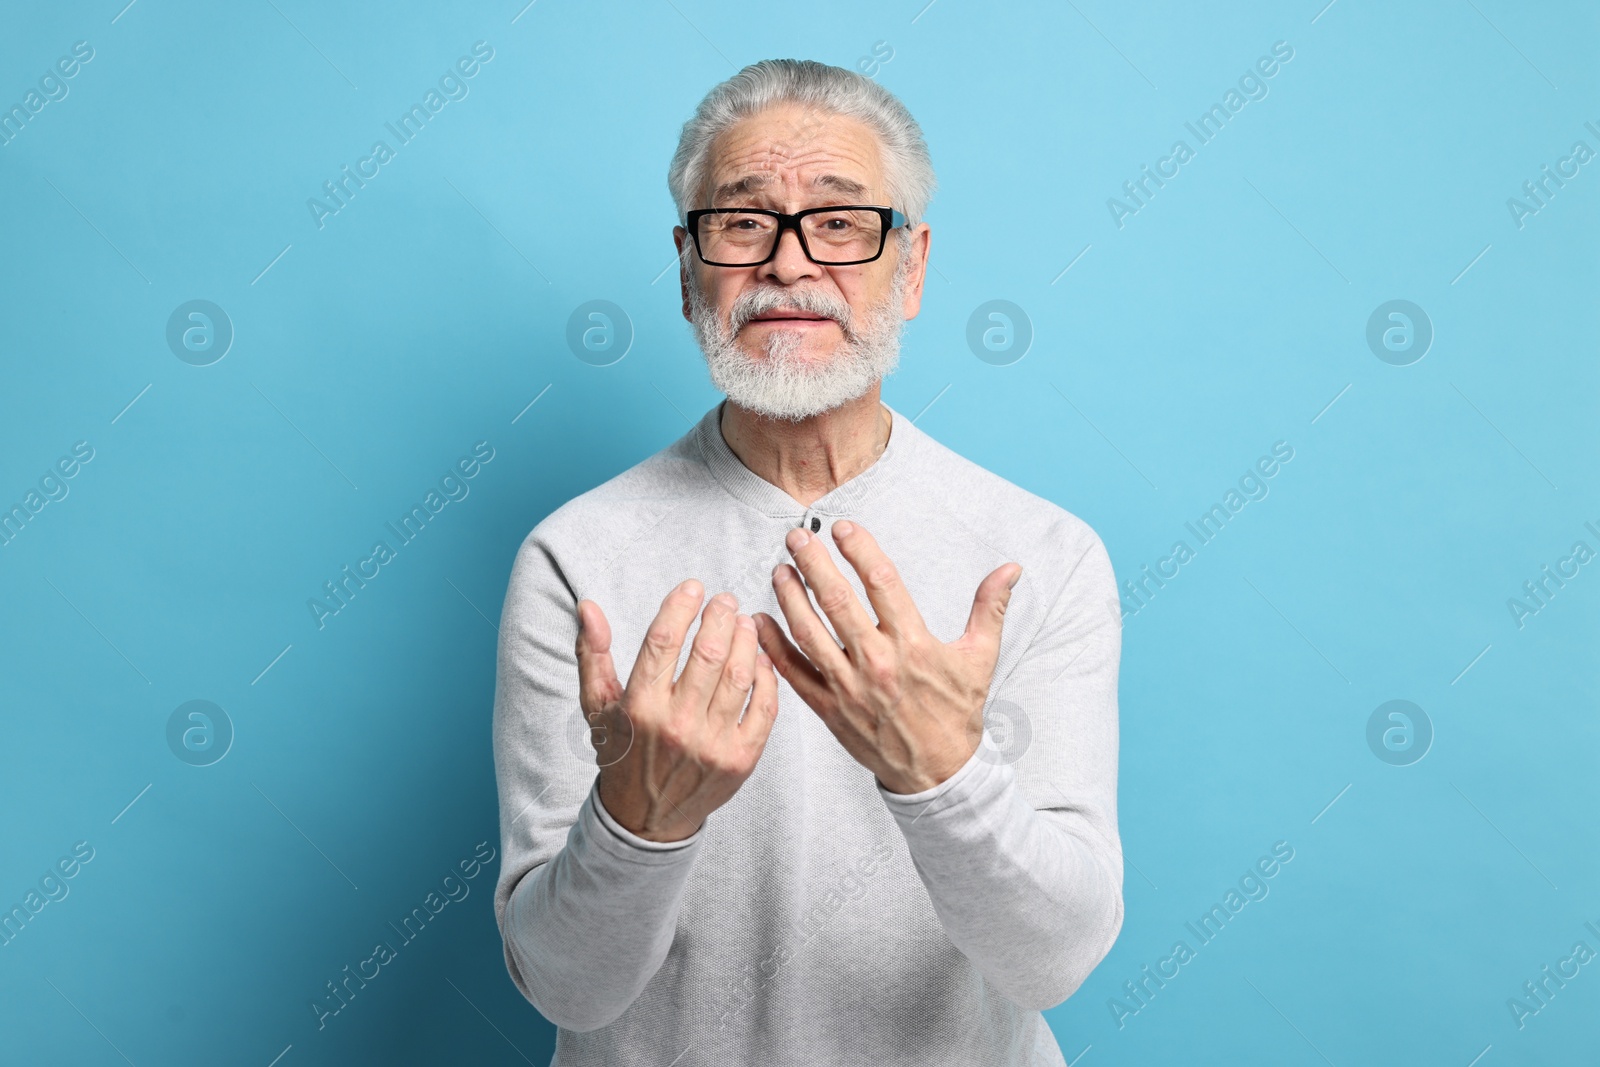 Photo of Arthritis symptoms. Man suffering from pain in hands on light blue background